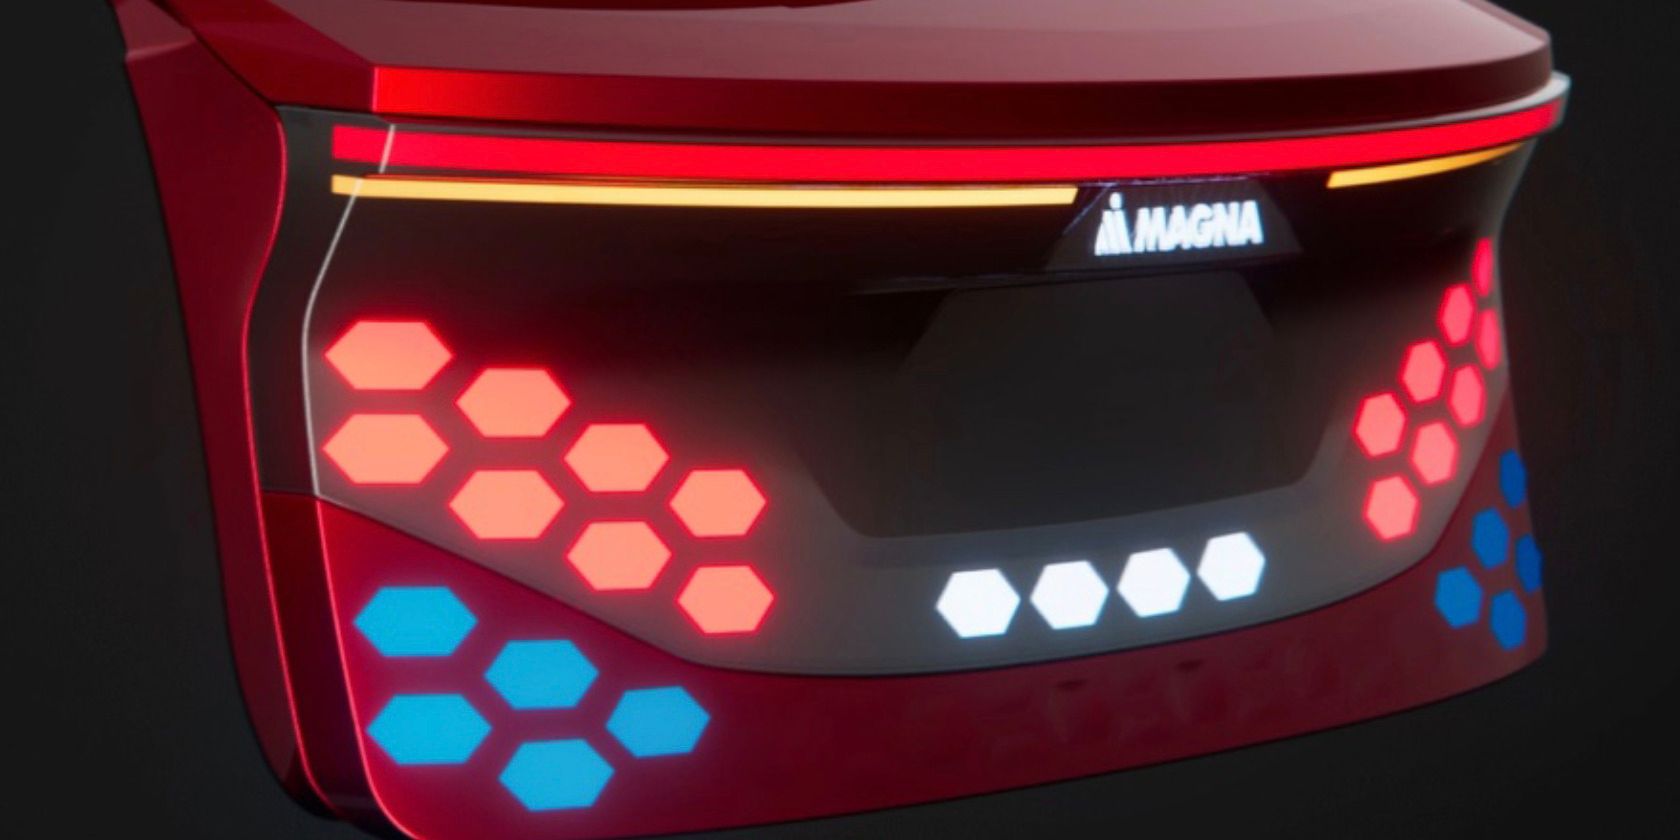 Rear tail lights with Magna Breakthrough lighting